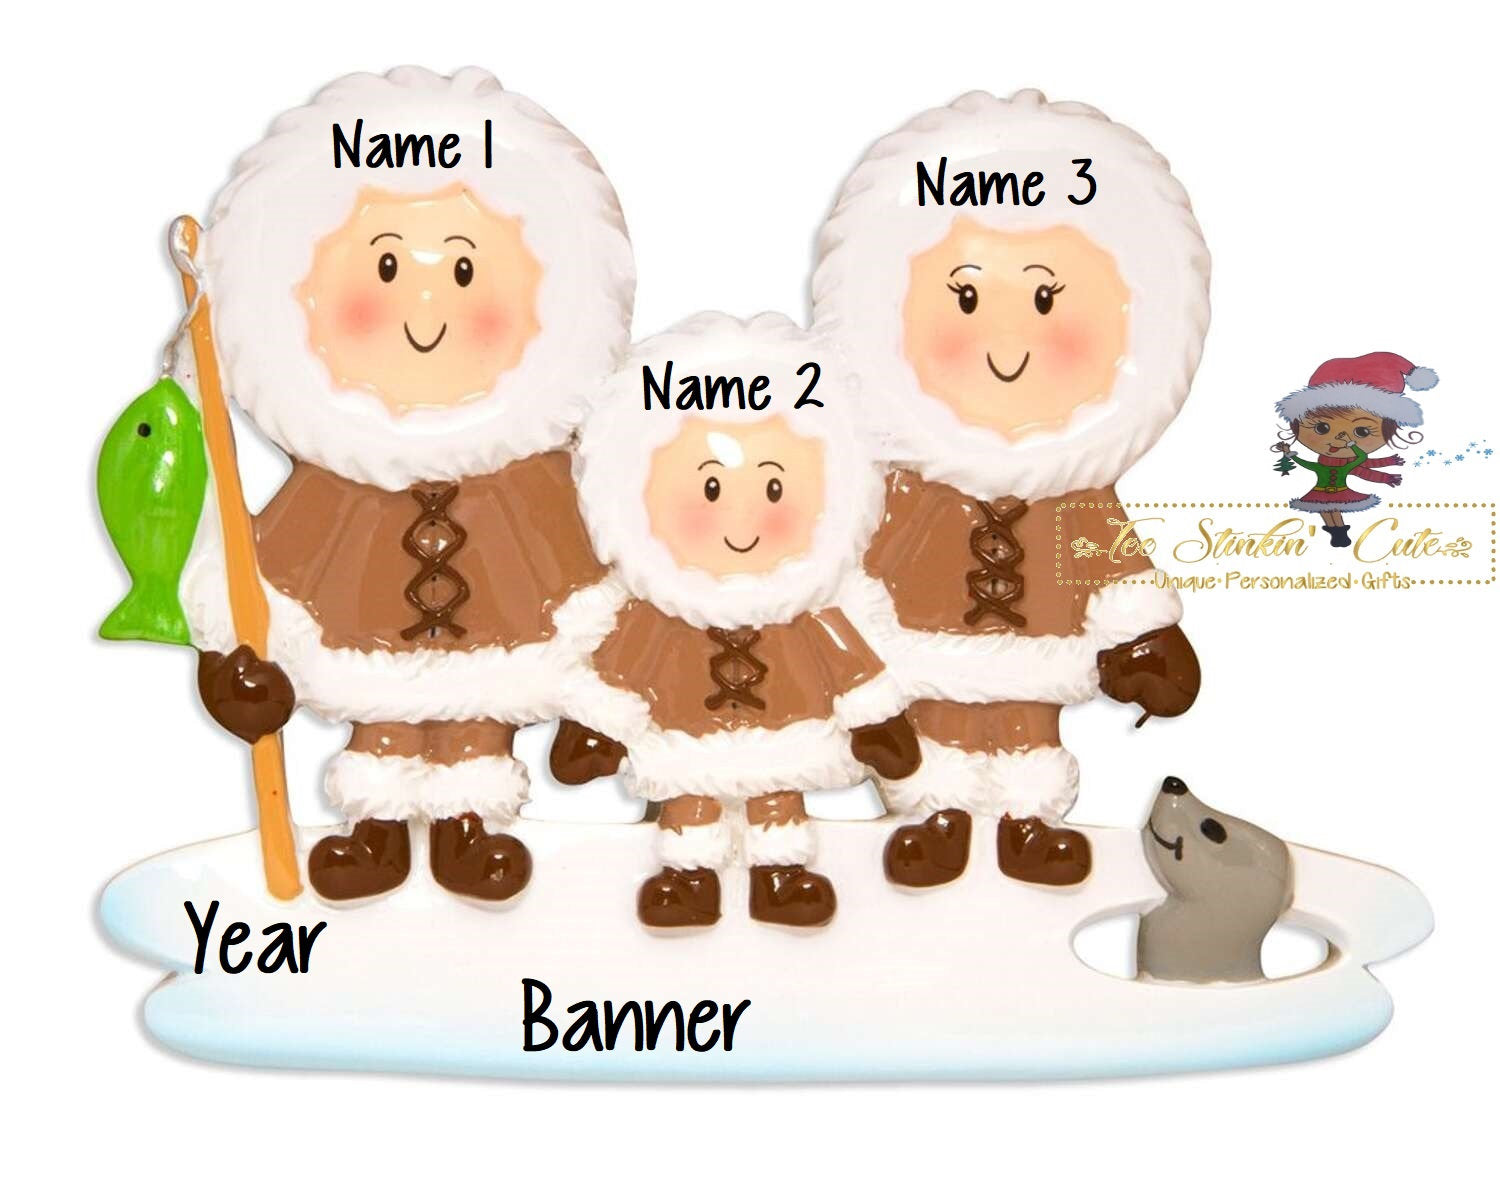 Christmas Ornament Eskimo Family of 3/ Friends/ Coworkers Personalized! + Free Shipping!